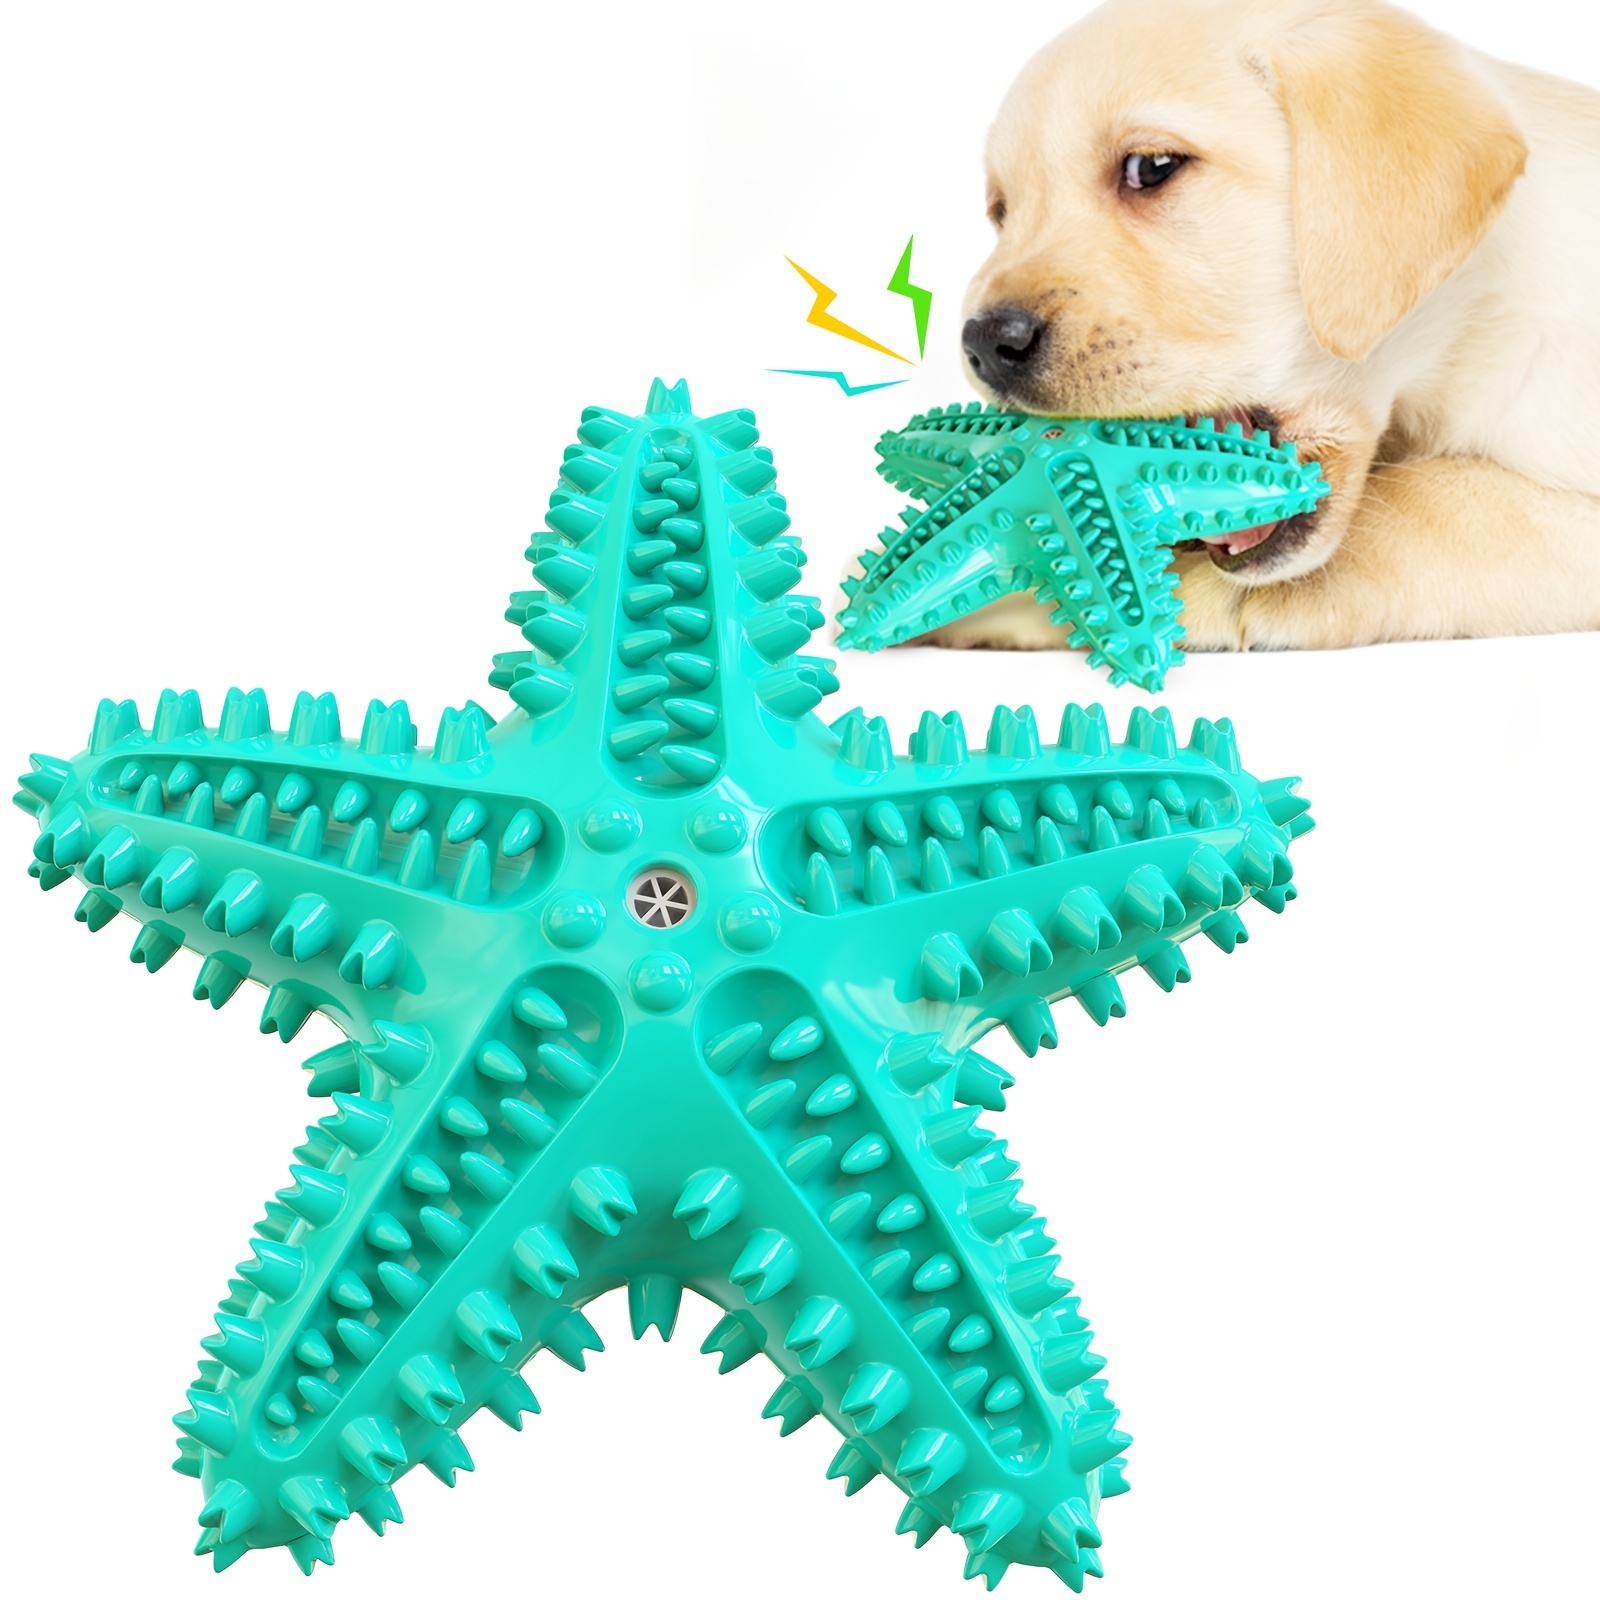 

Durable And Interactive Pet Dog Toy For Molar Play - Tough And Squeaky Starfish Chew Toy